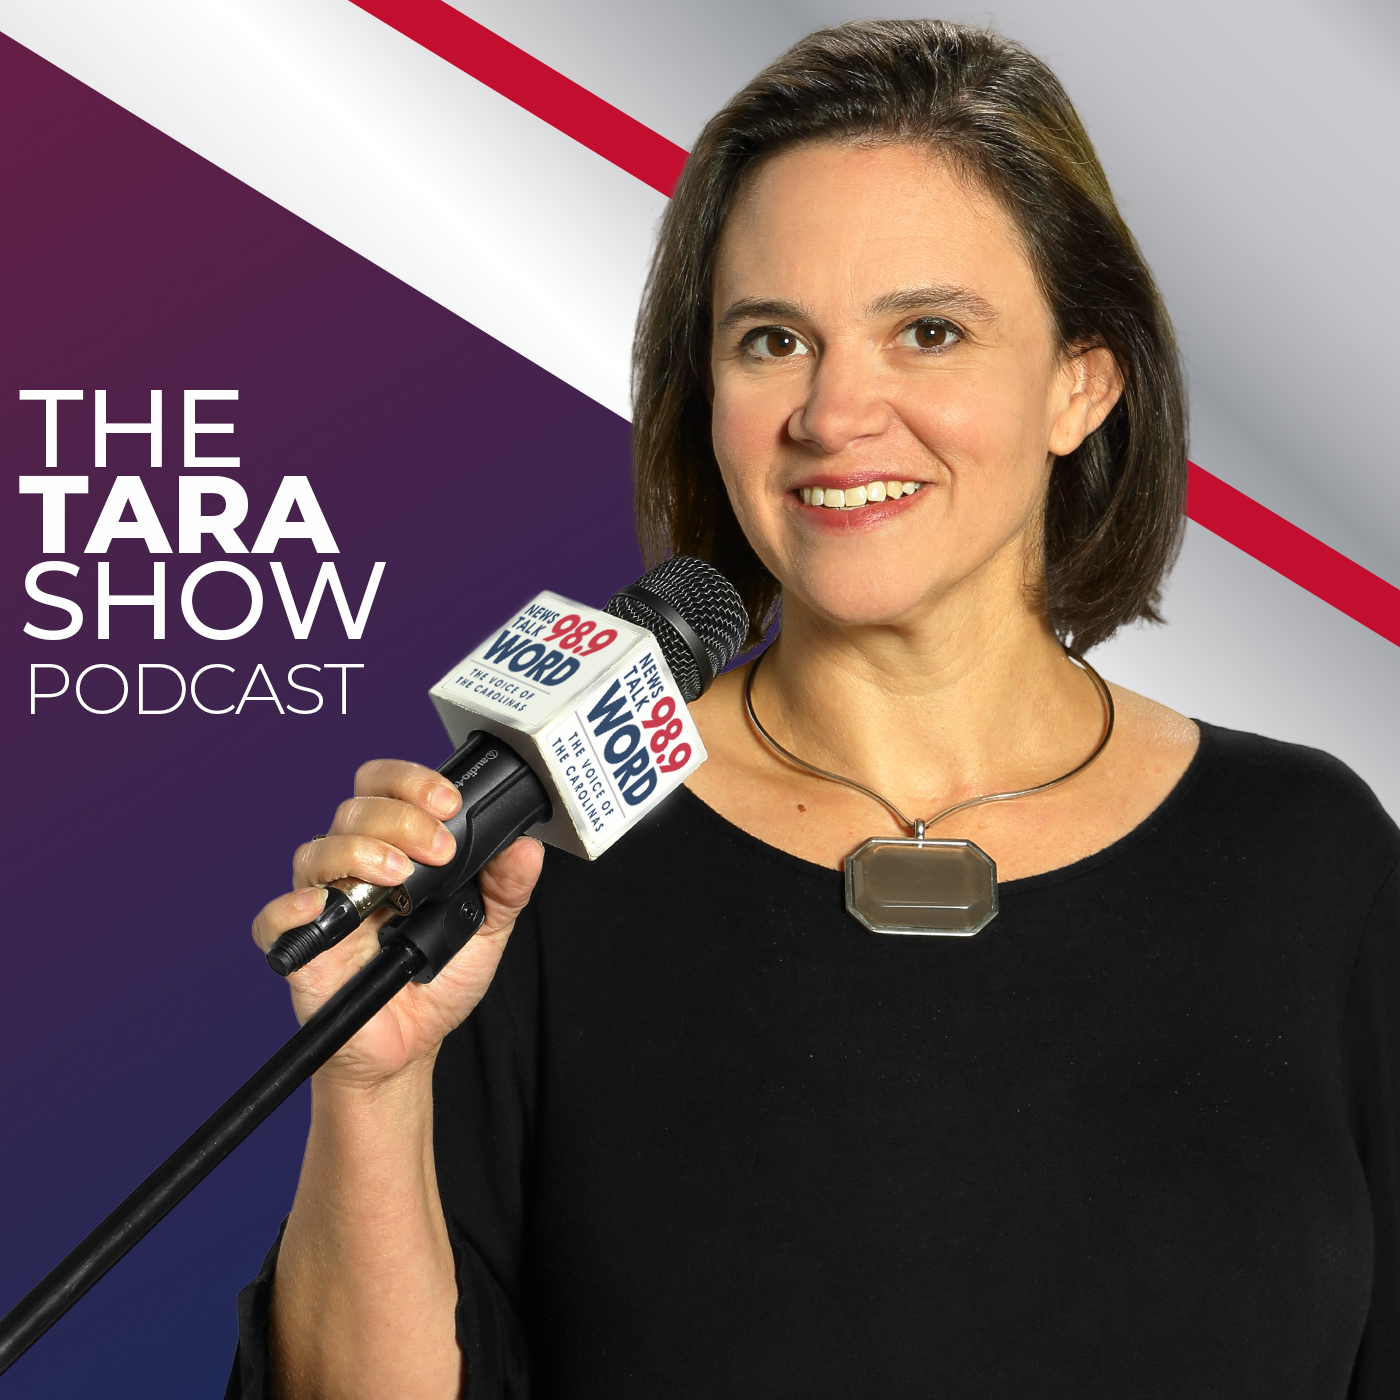 Hour 3: The Tara Show - “Diabolical Villain Peter Daszak” “Palestinian Refugees Coming to America” “Hate Crimes at UCLA” “Text Line Responds”